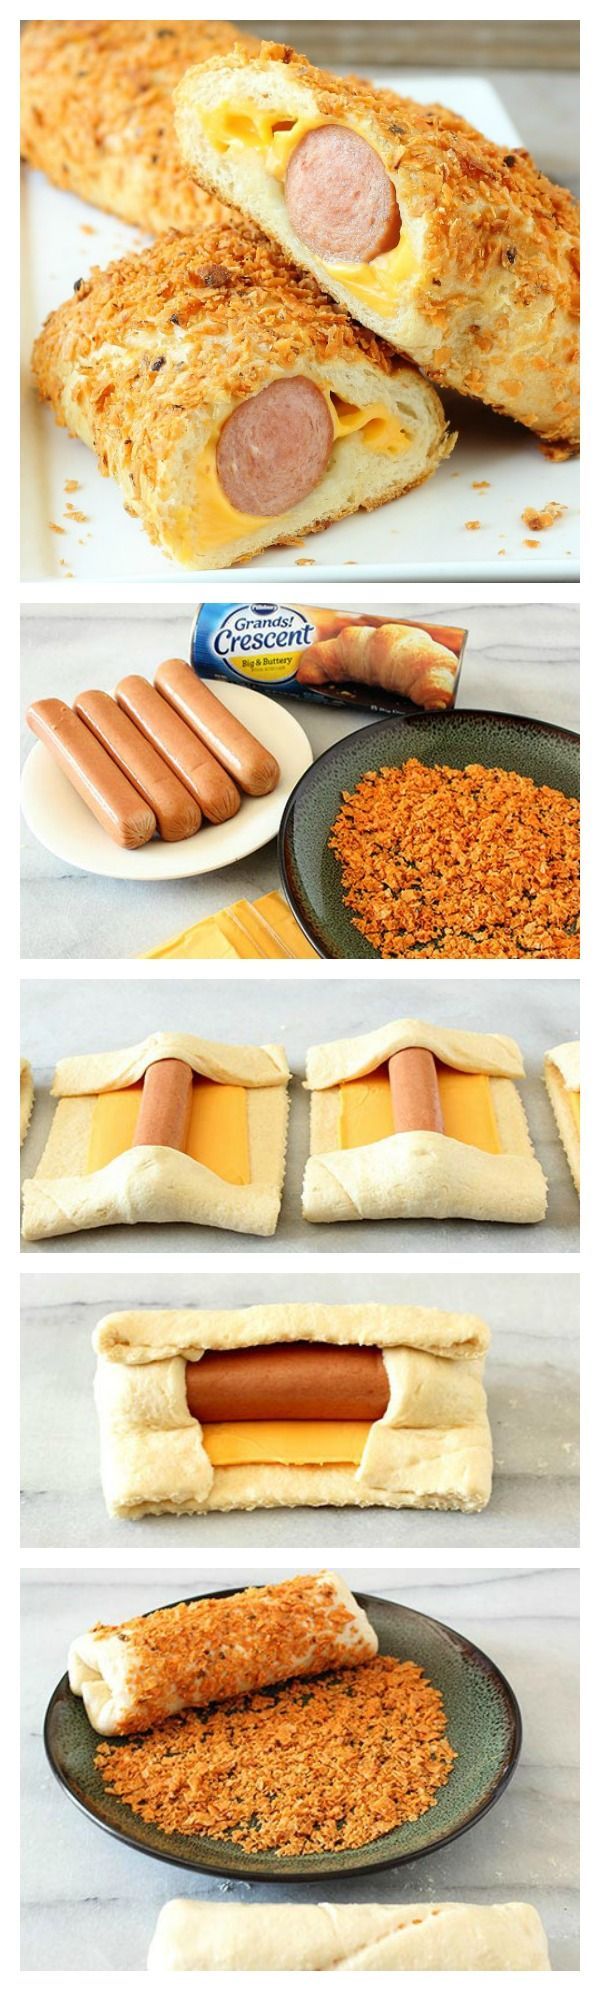 Crunchy nachos cheesy crescent dogs = ultimate mash-up!